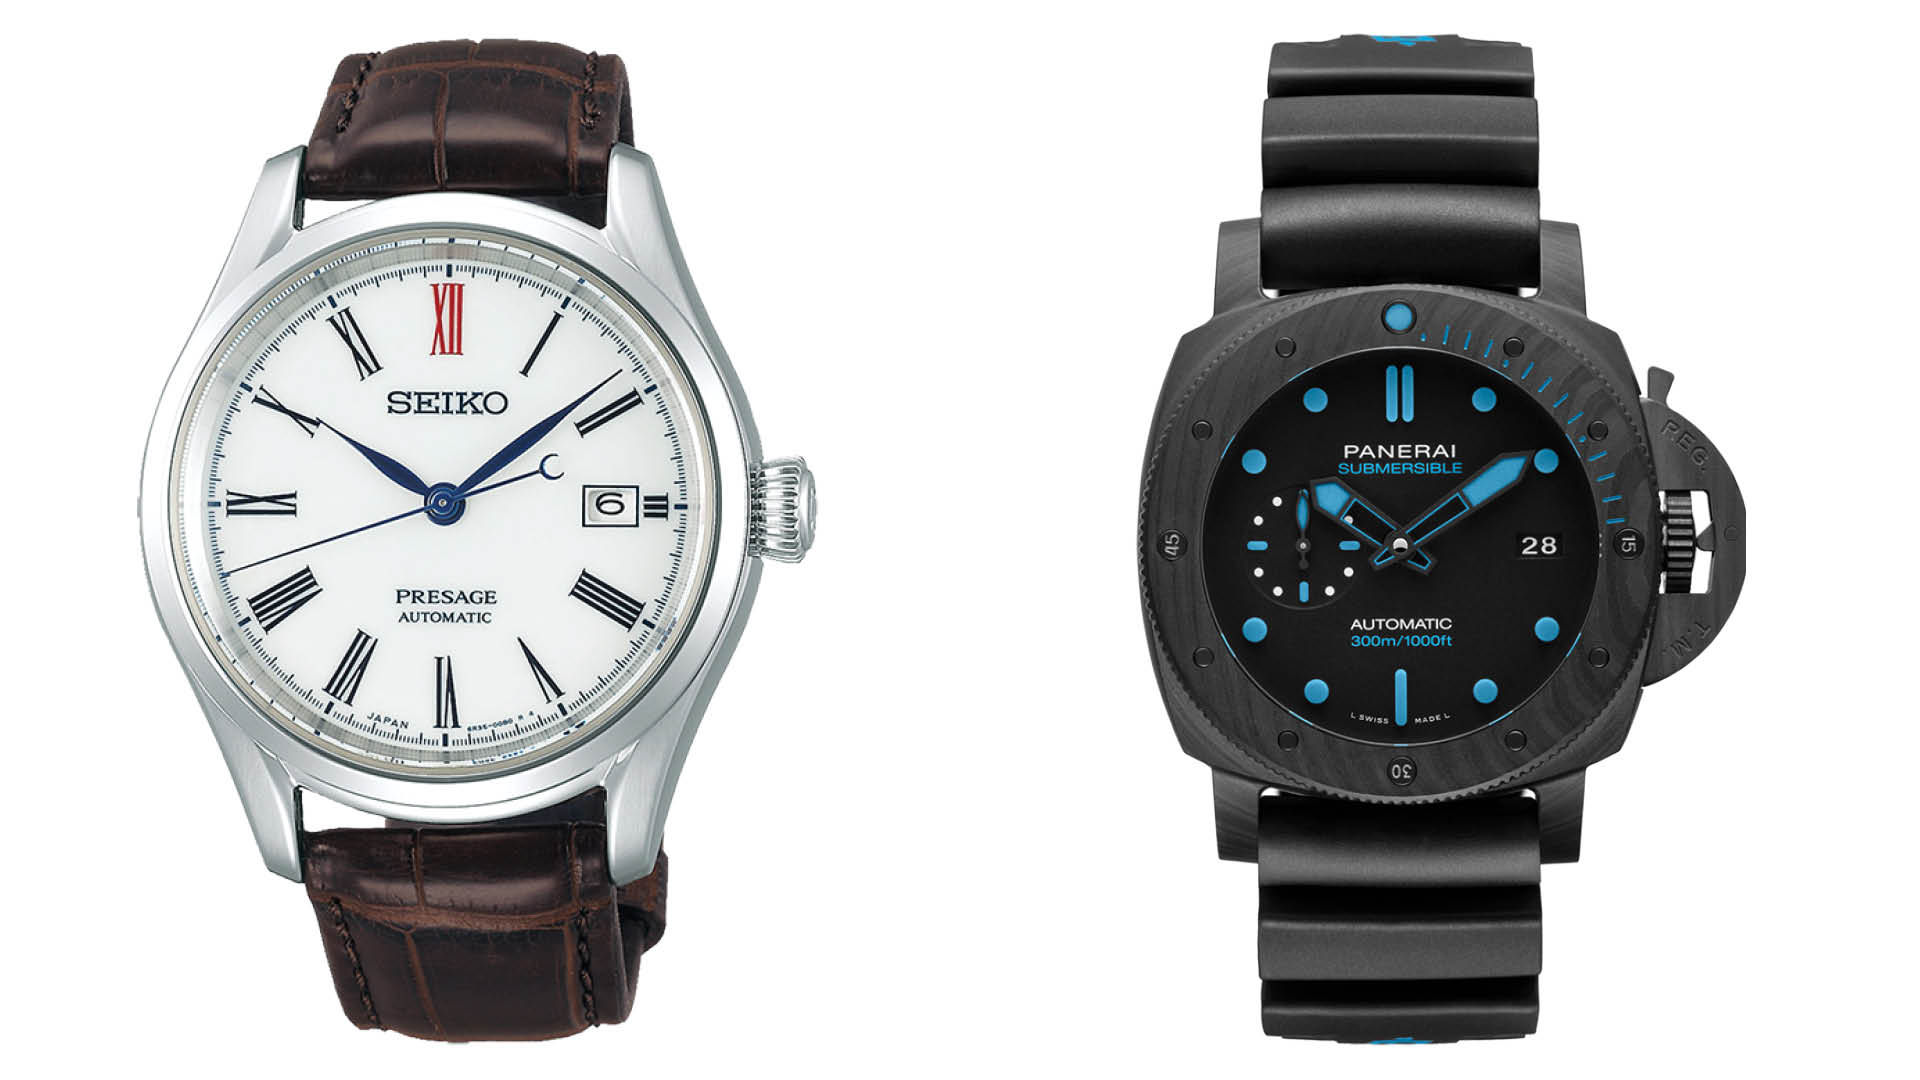 This Valentine's Month, Make Time For Love With These New Watches